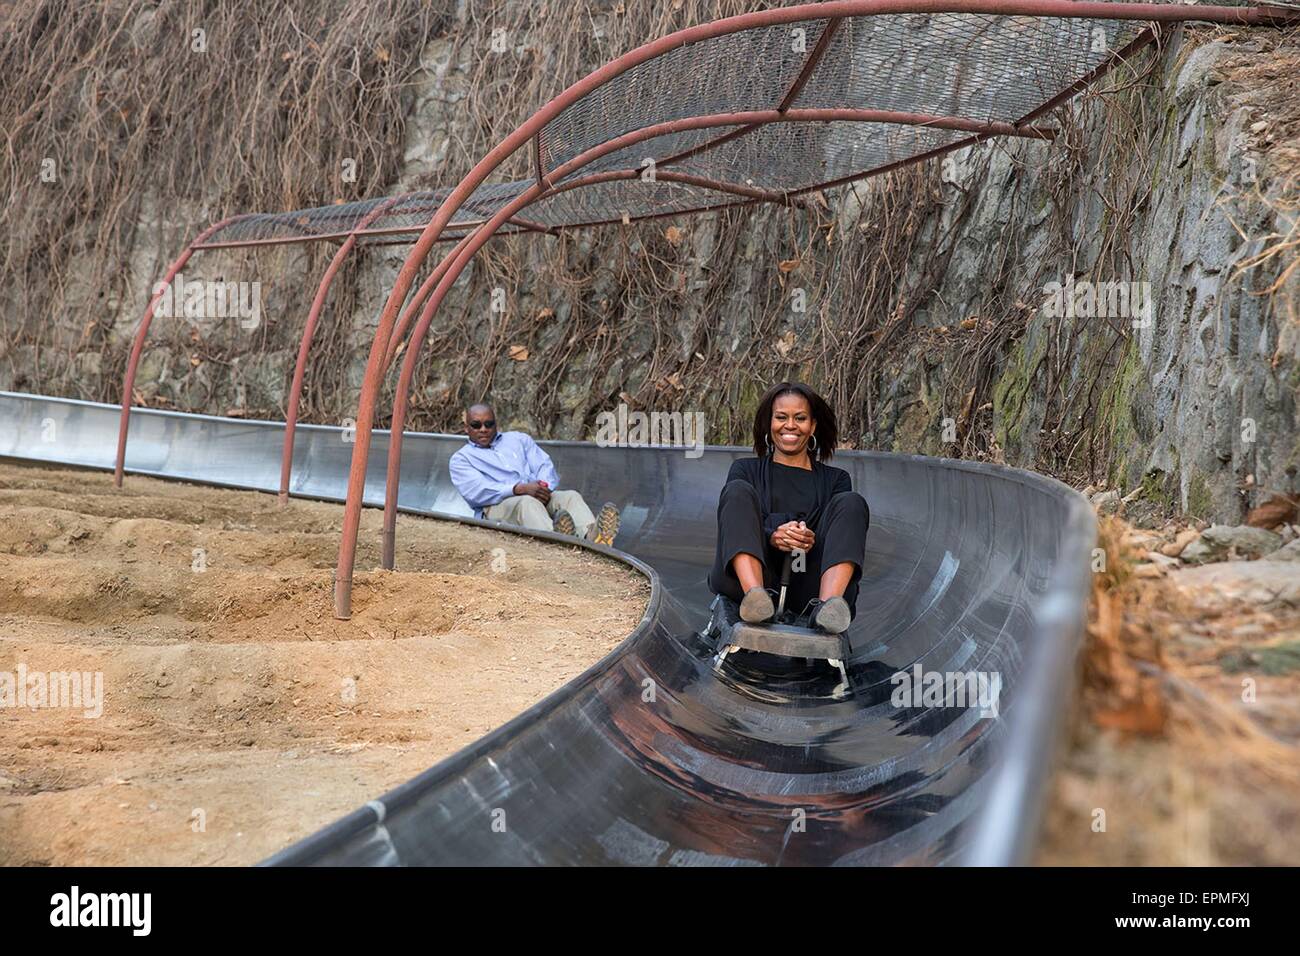 First Lady Michelle Obama rides a toboggan slide at the Great Wall of China March 23, 2014 in Mutianyu, China. Stock Photo